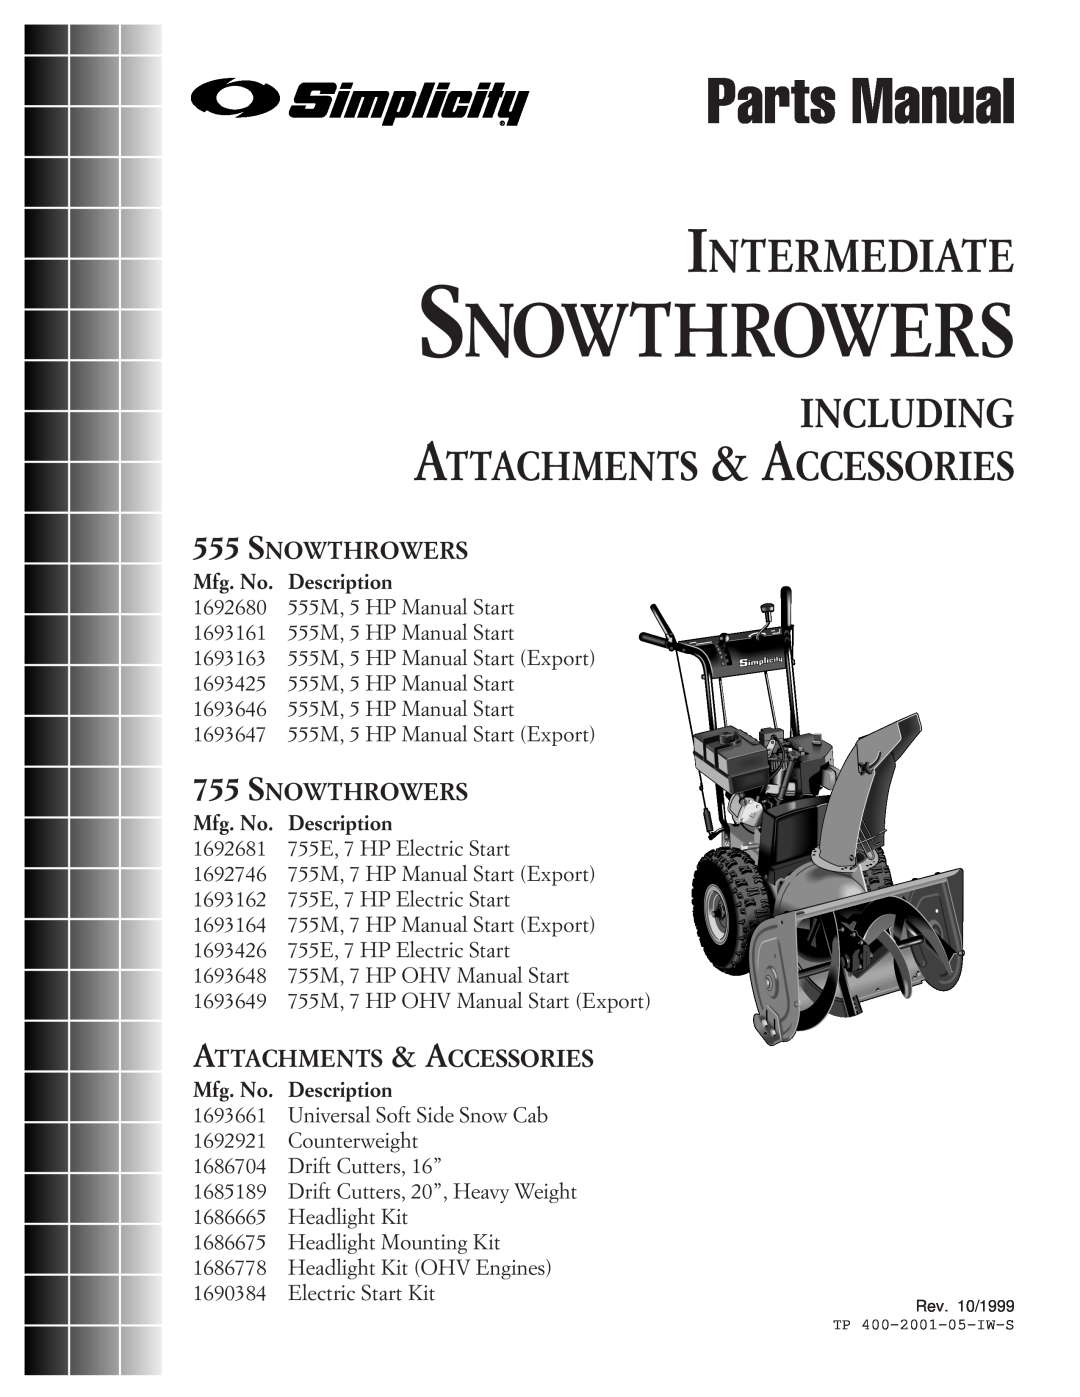 Simplicity 1693163, 1693161 manual Snowthrowers, Parts Manual, Intermediate, Including, Attachments & Accessories, Mfg. No 